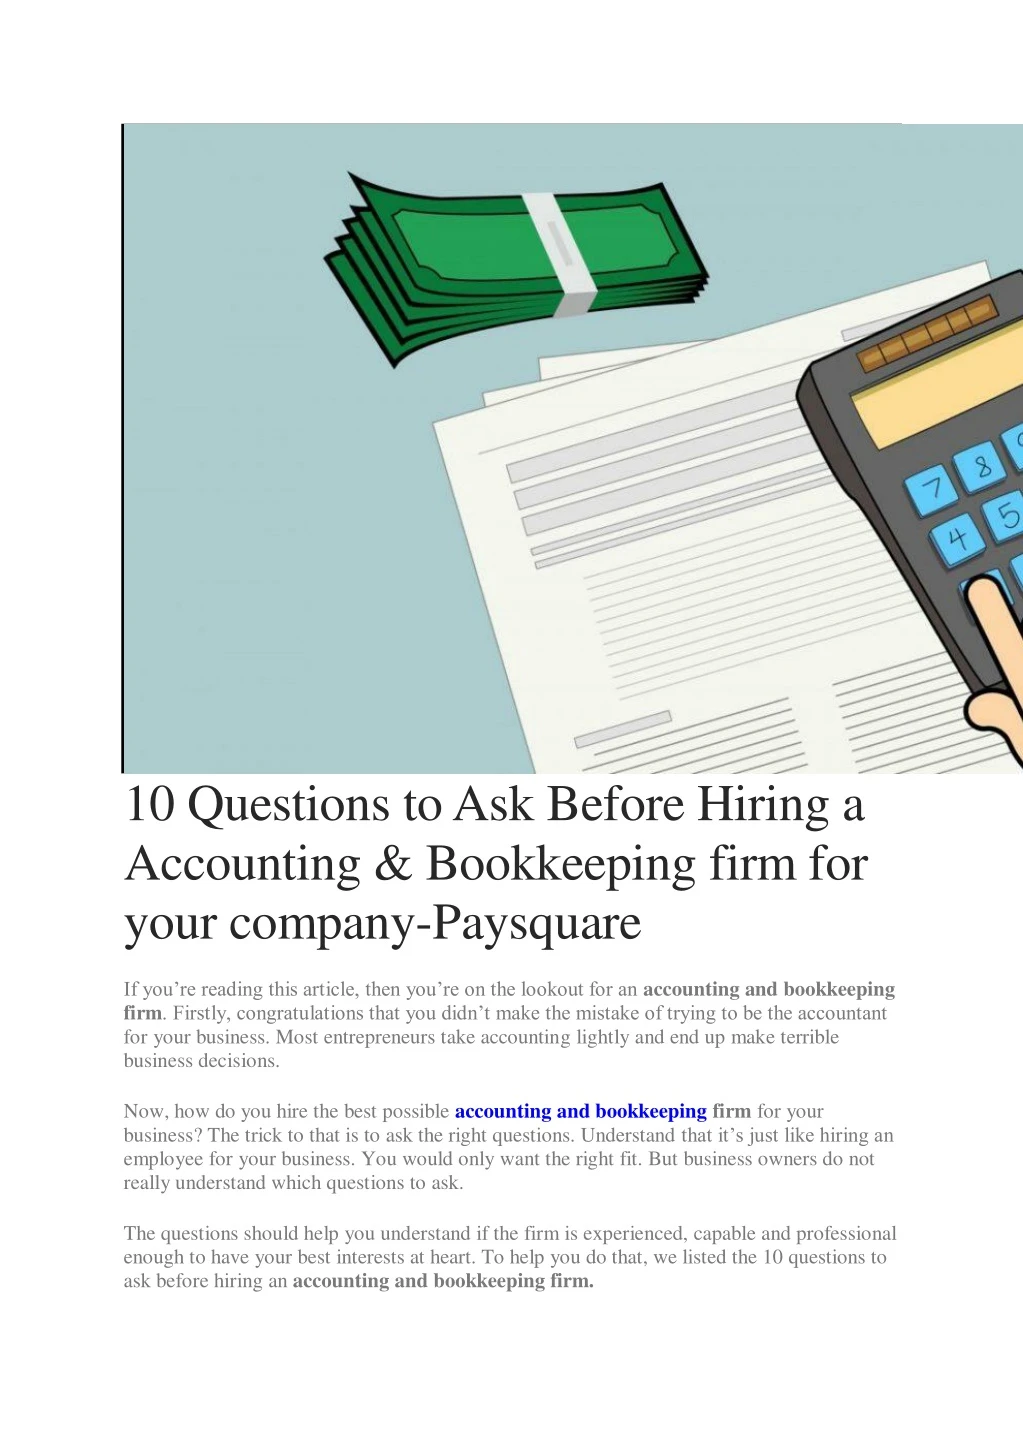 10 questions to ask before hiring a accounting